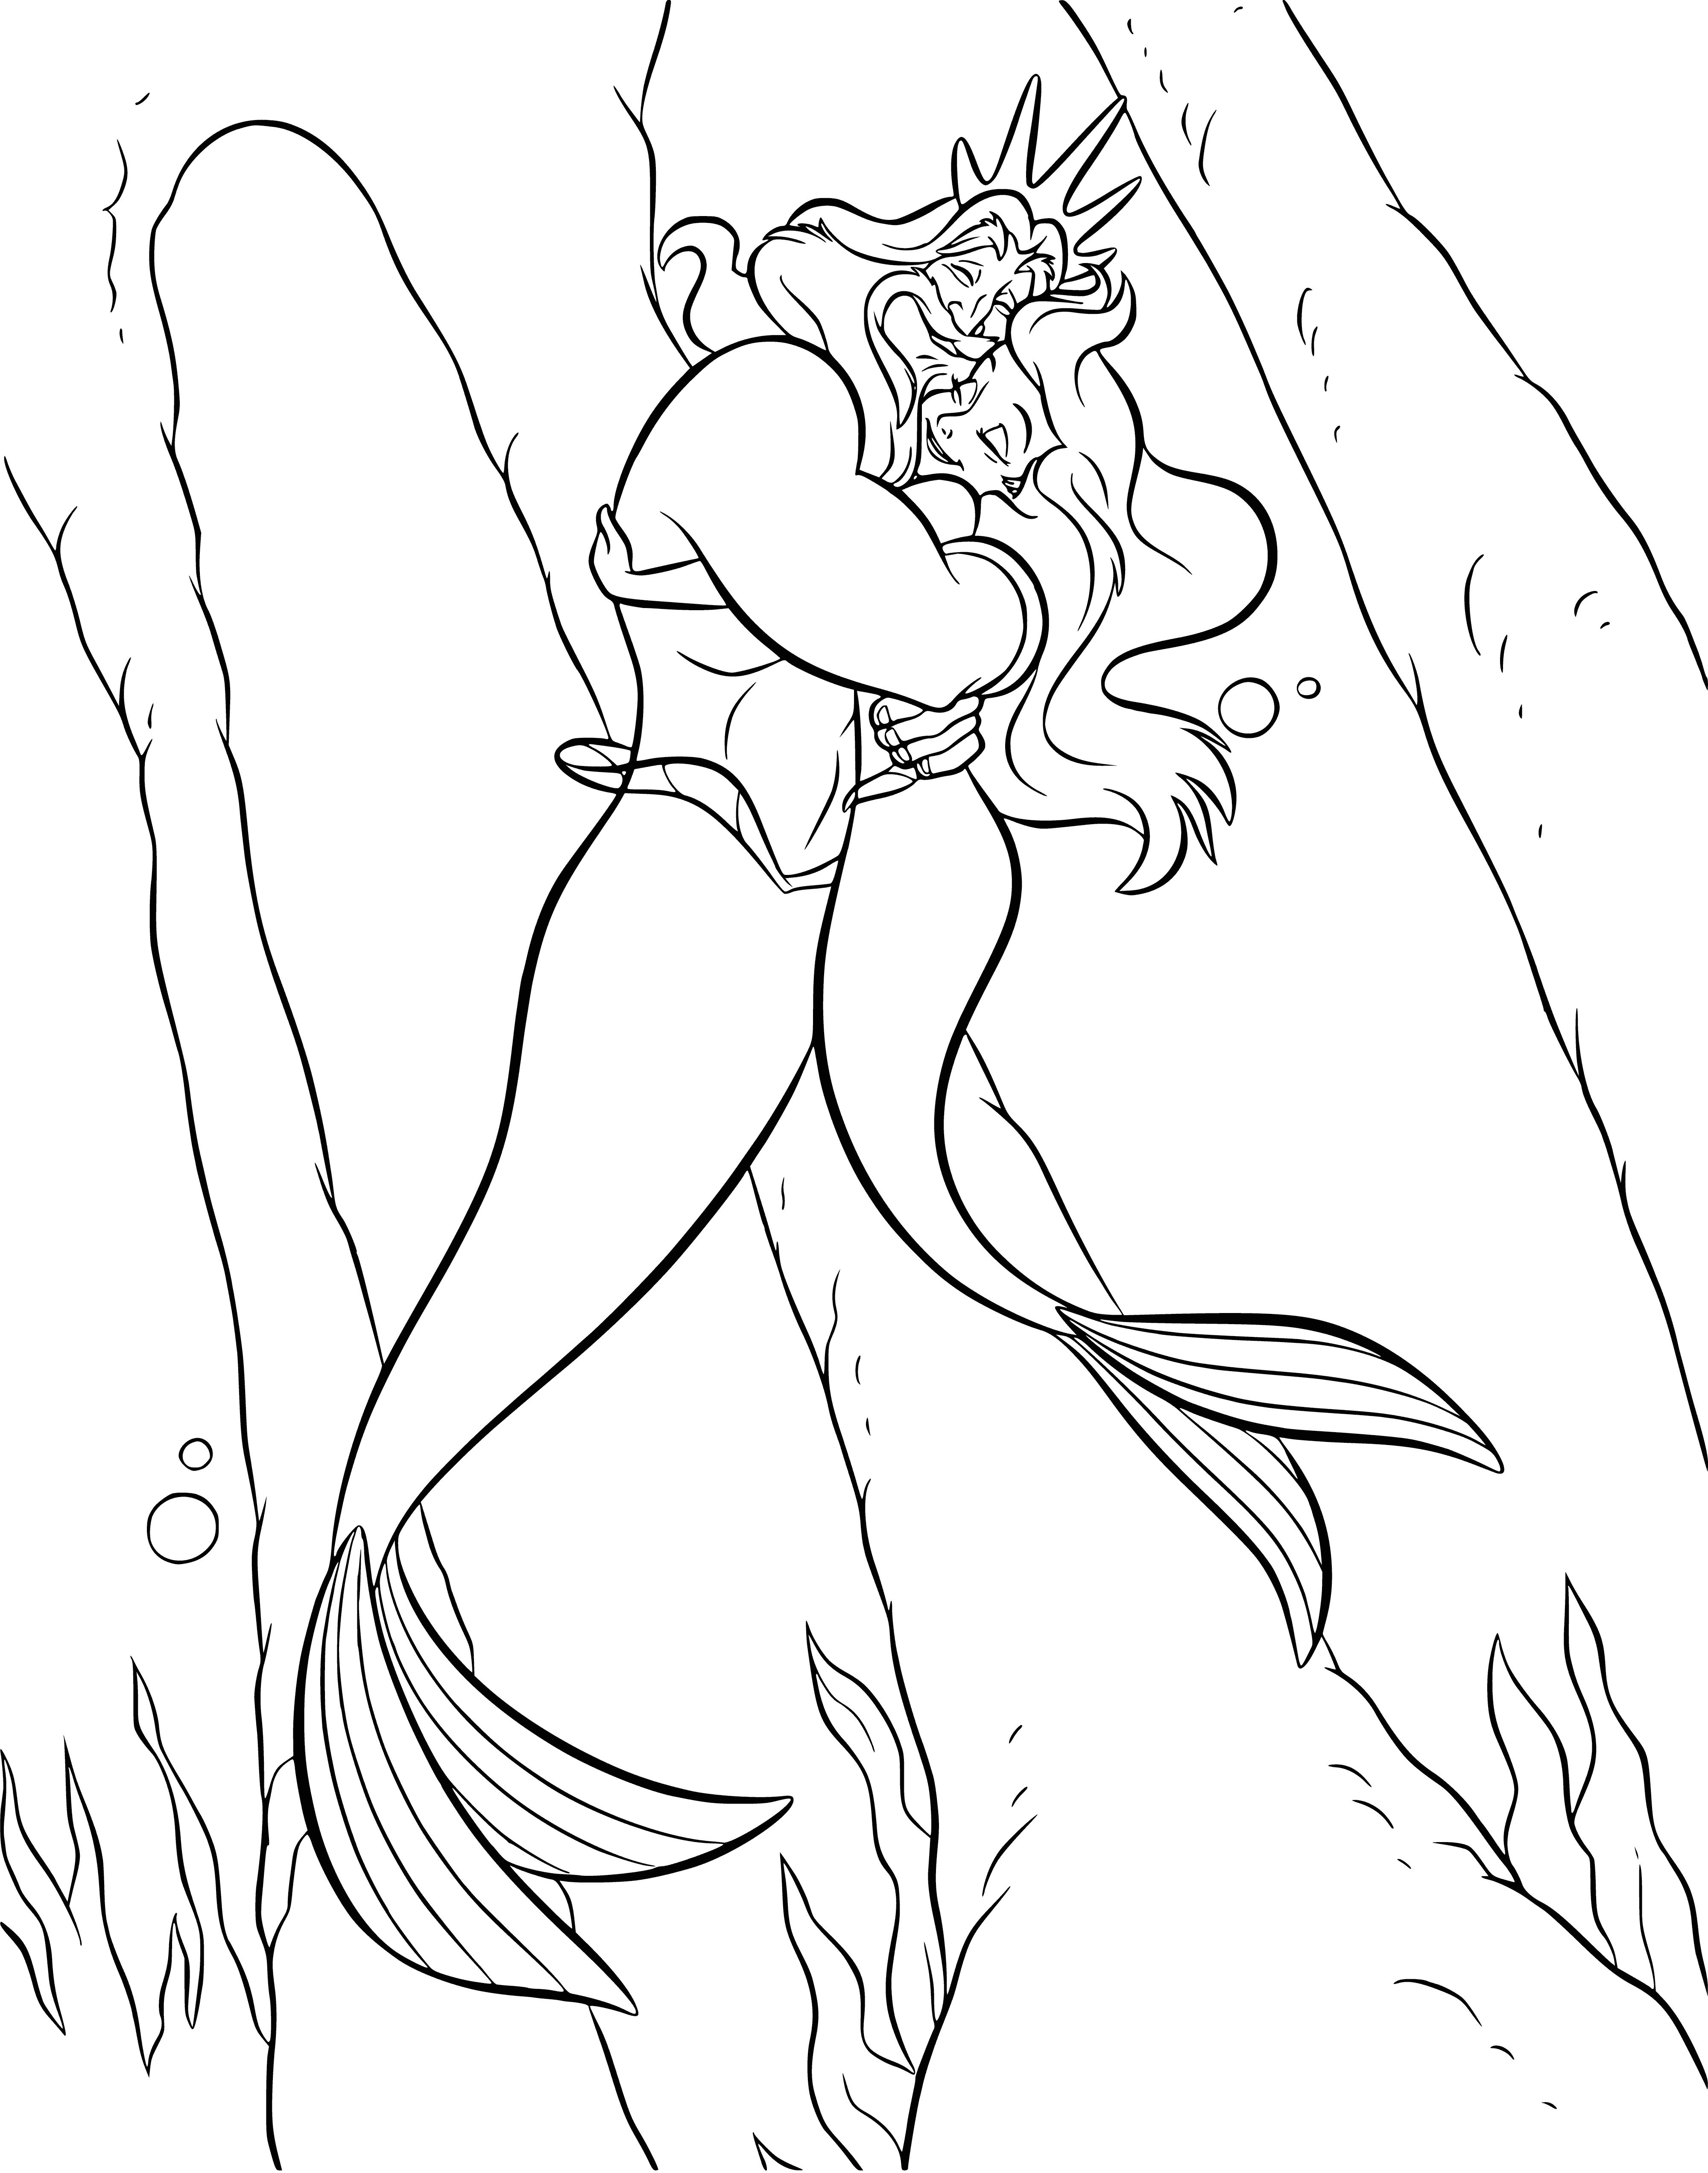 coloring page: Ariel and King Triton swim amidst a coral reef and fish in a coloring page.